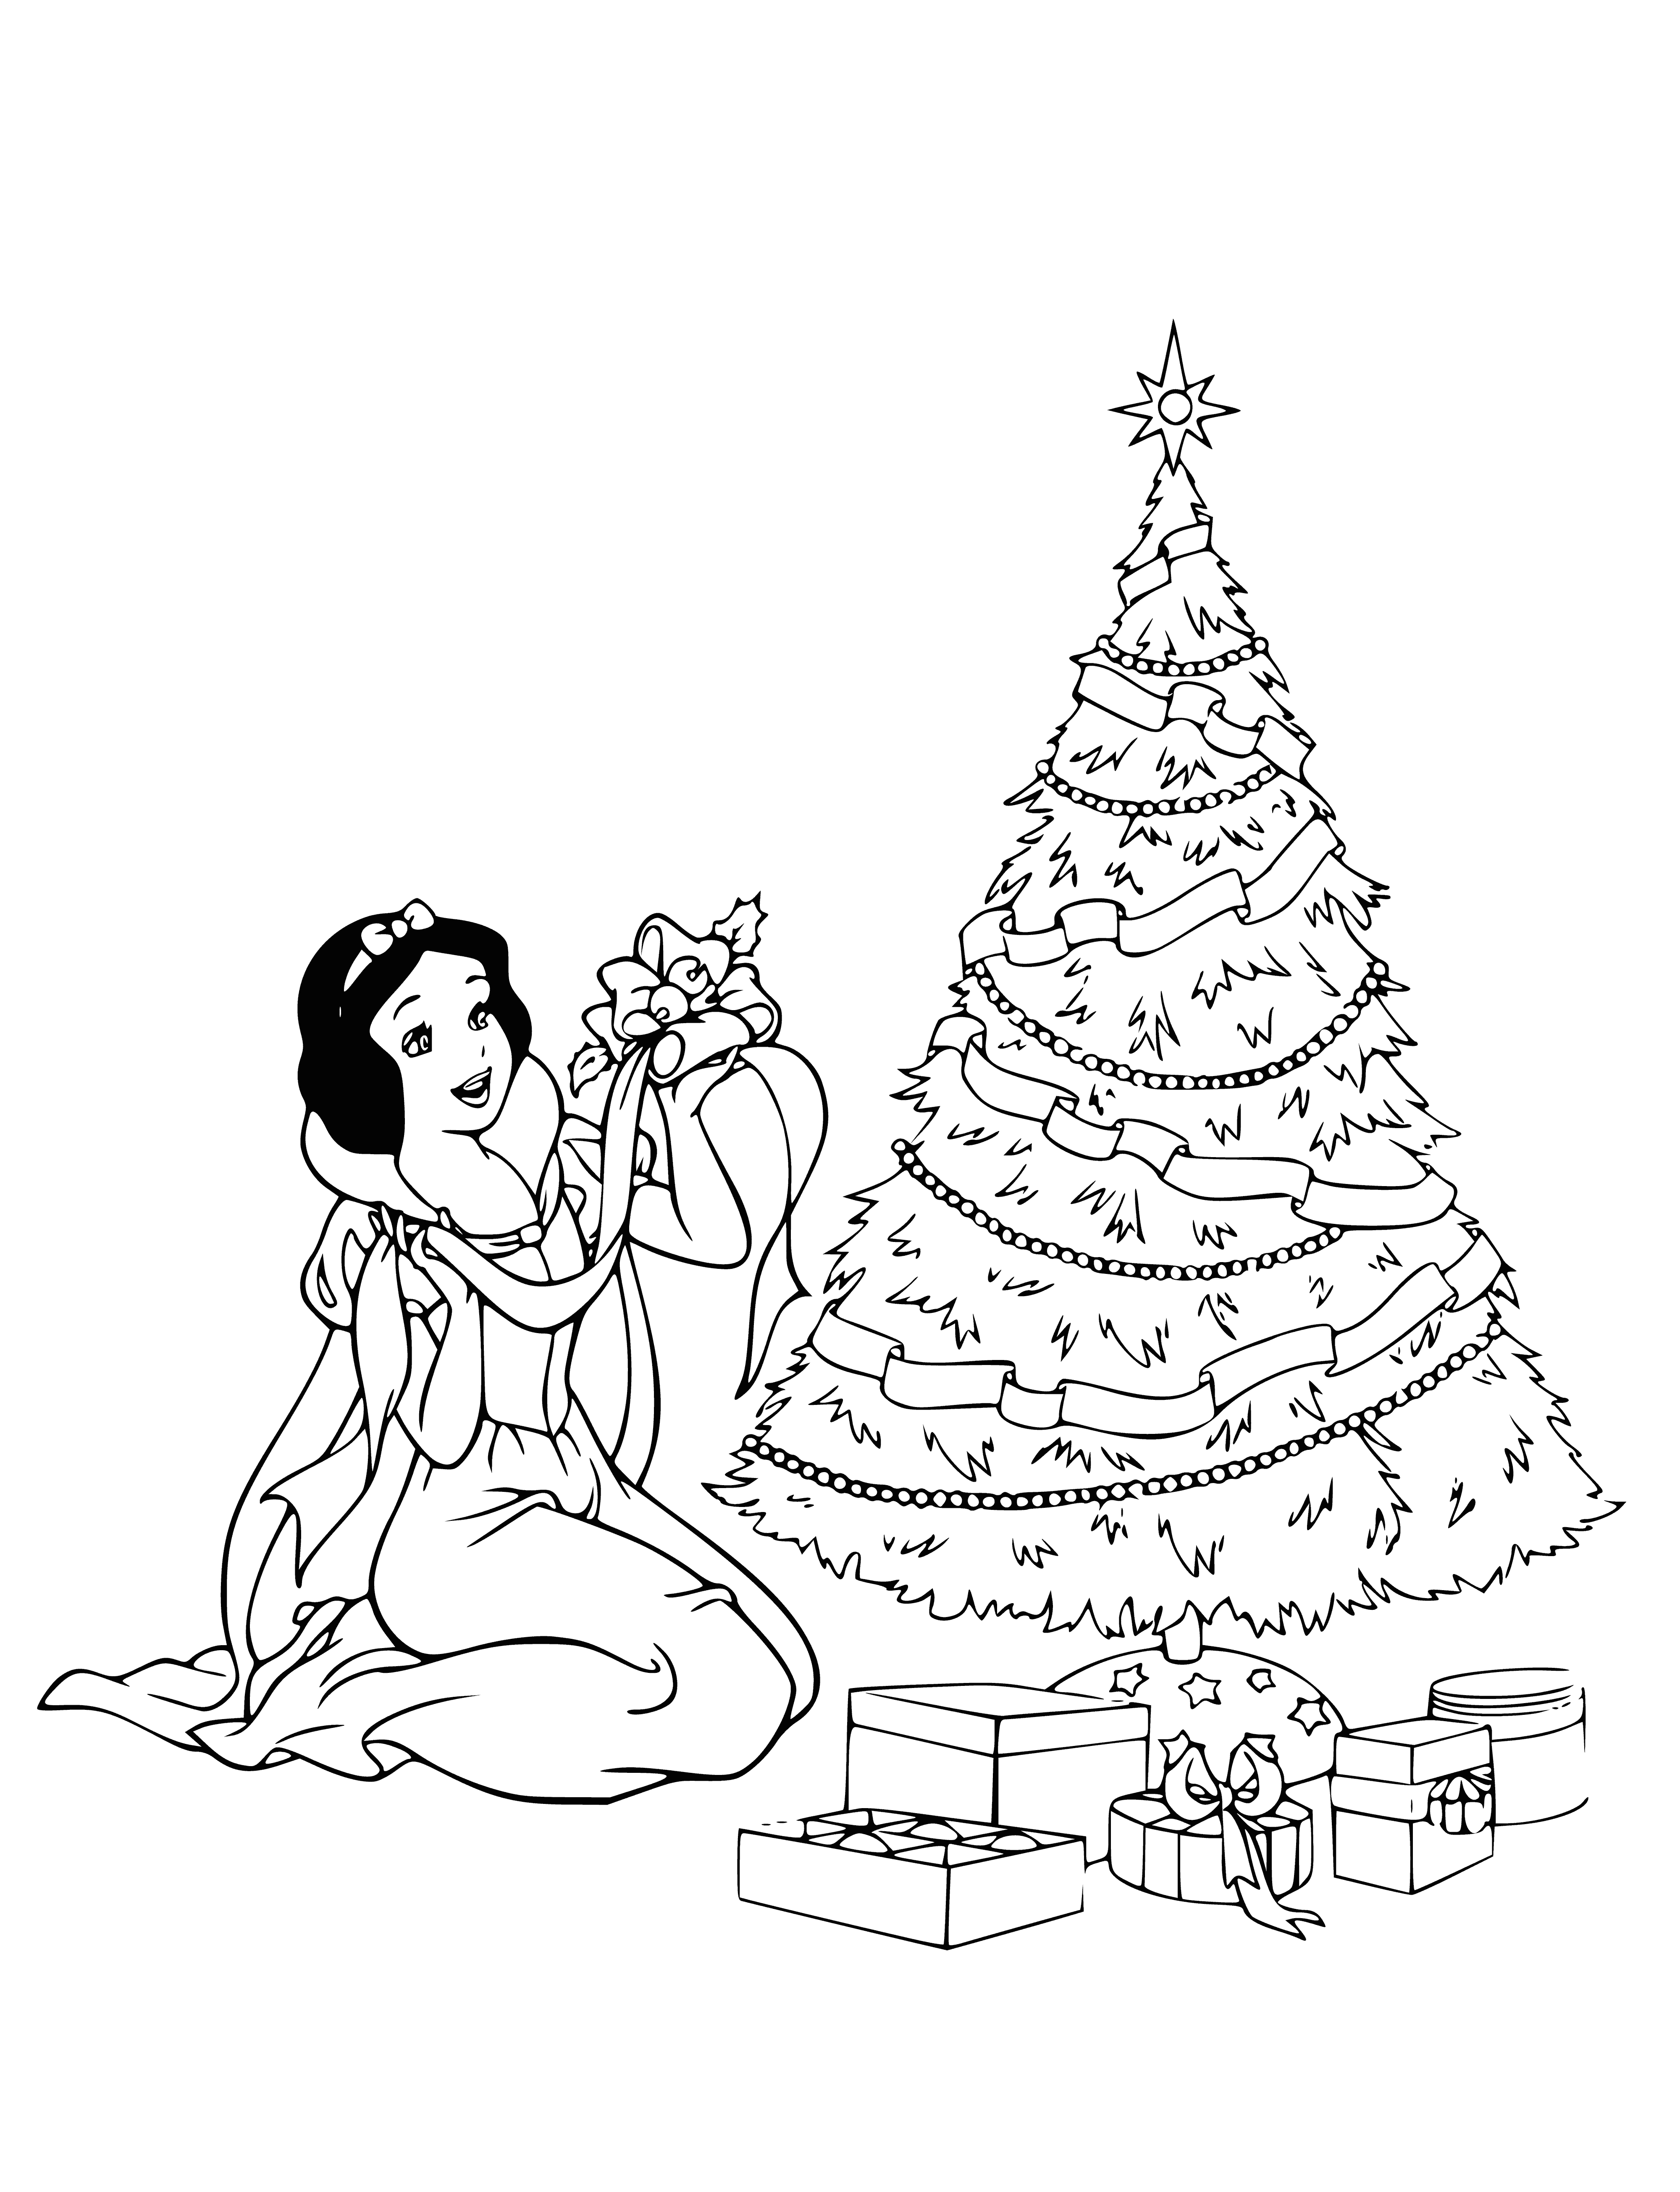 coloring page: Snow White & other Disney Princesses gathered around a Christmas tree, enjoying each other’s company near a fireplace. Clock reads almost midnight.